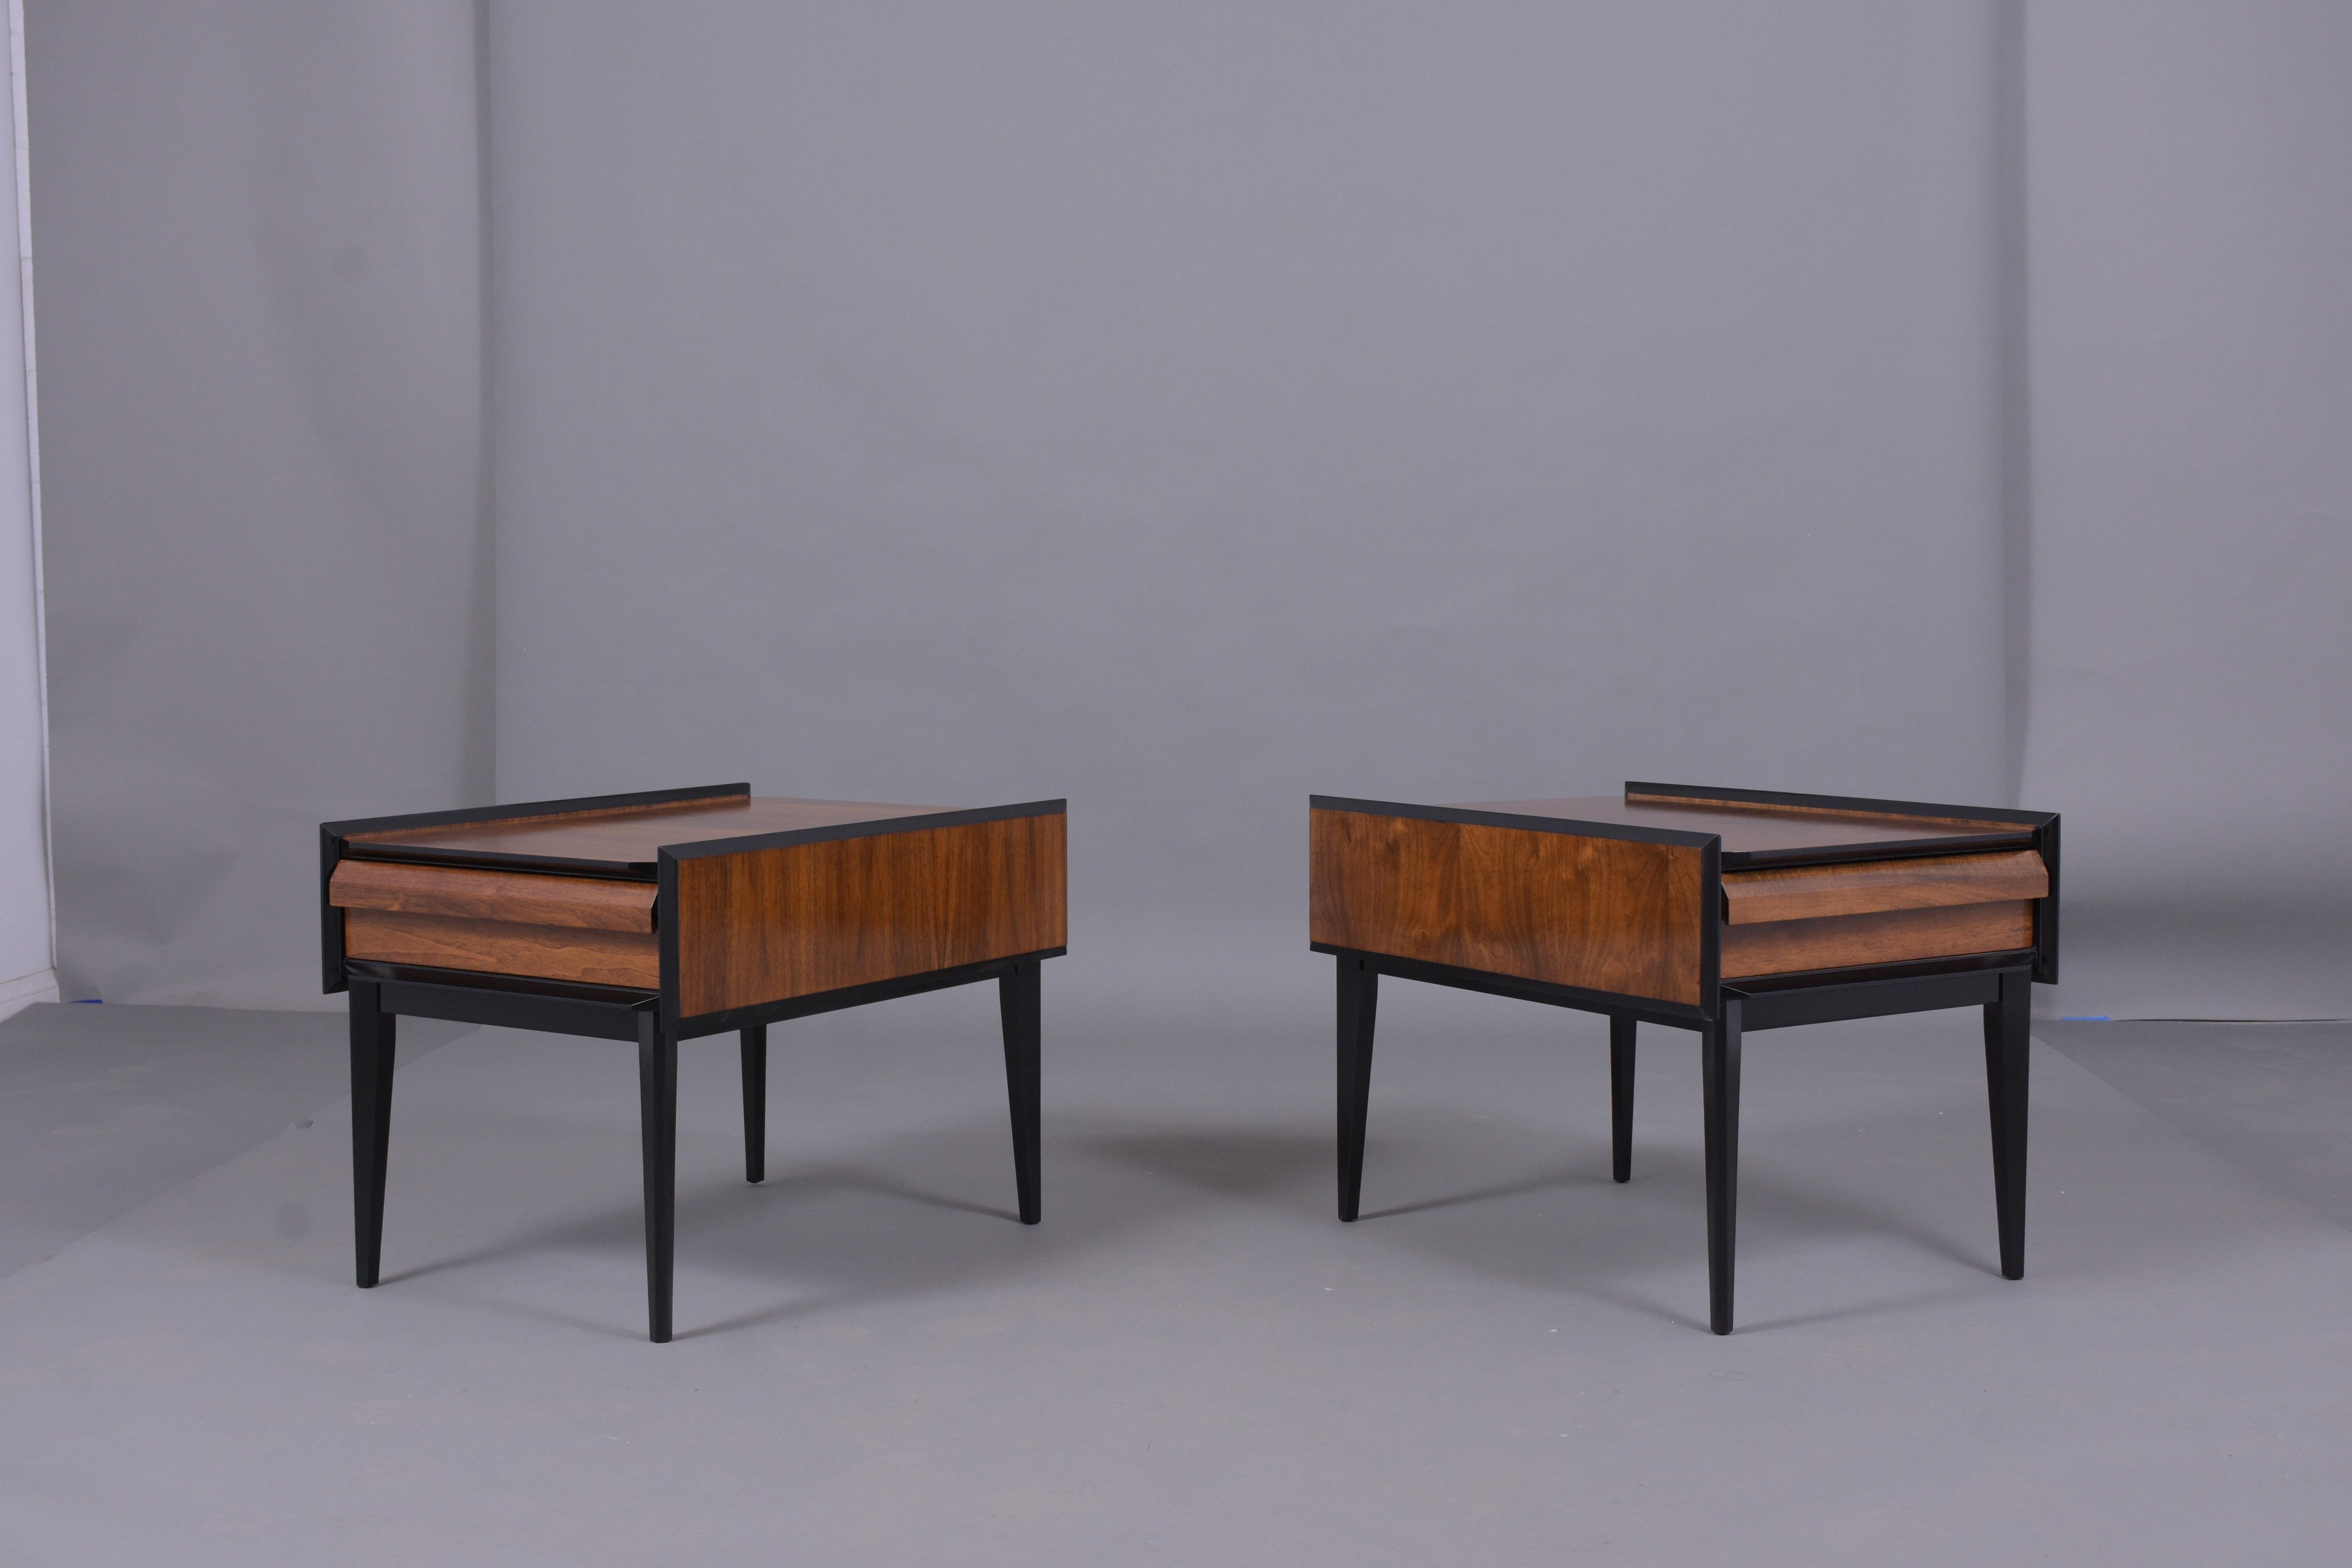 This pair of mid-century modern side tables are made out of walnut wood and have been professionally restored by our team of craftsmen in-house. The pair of bedside tables come with a new finish in a provincial and ebonized color combination with